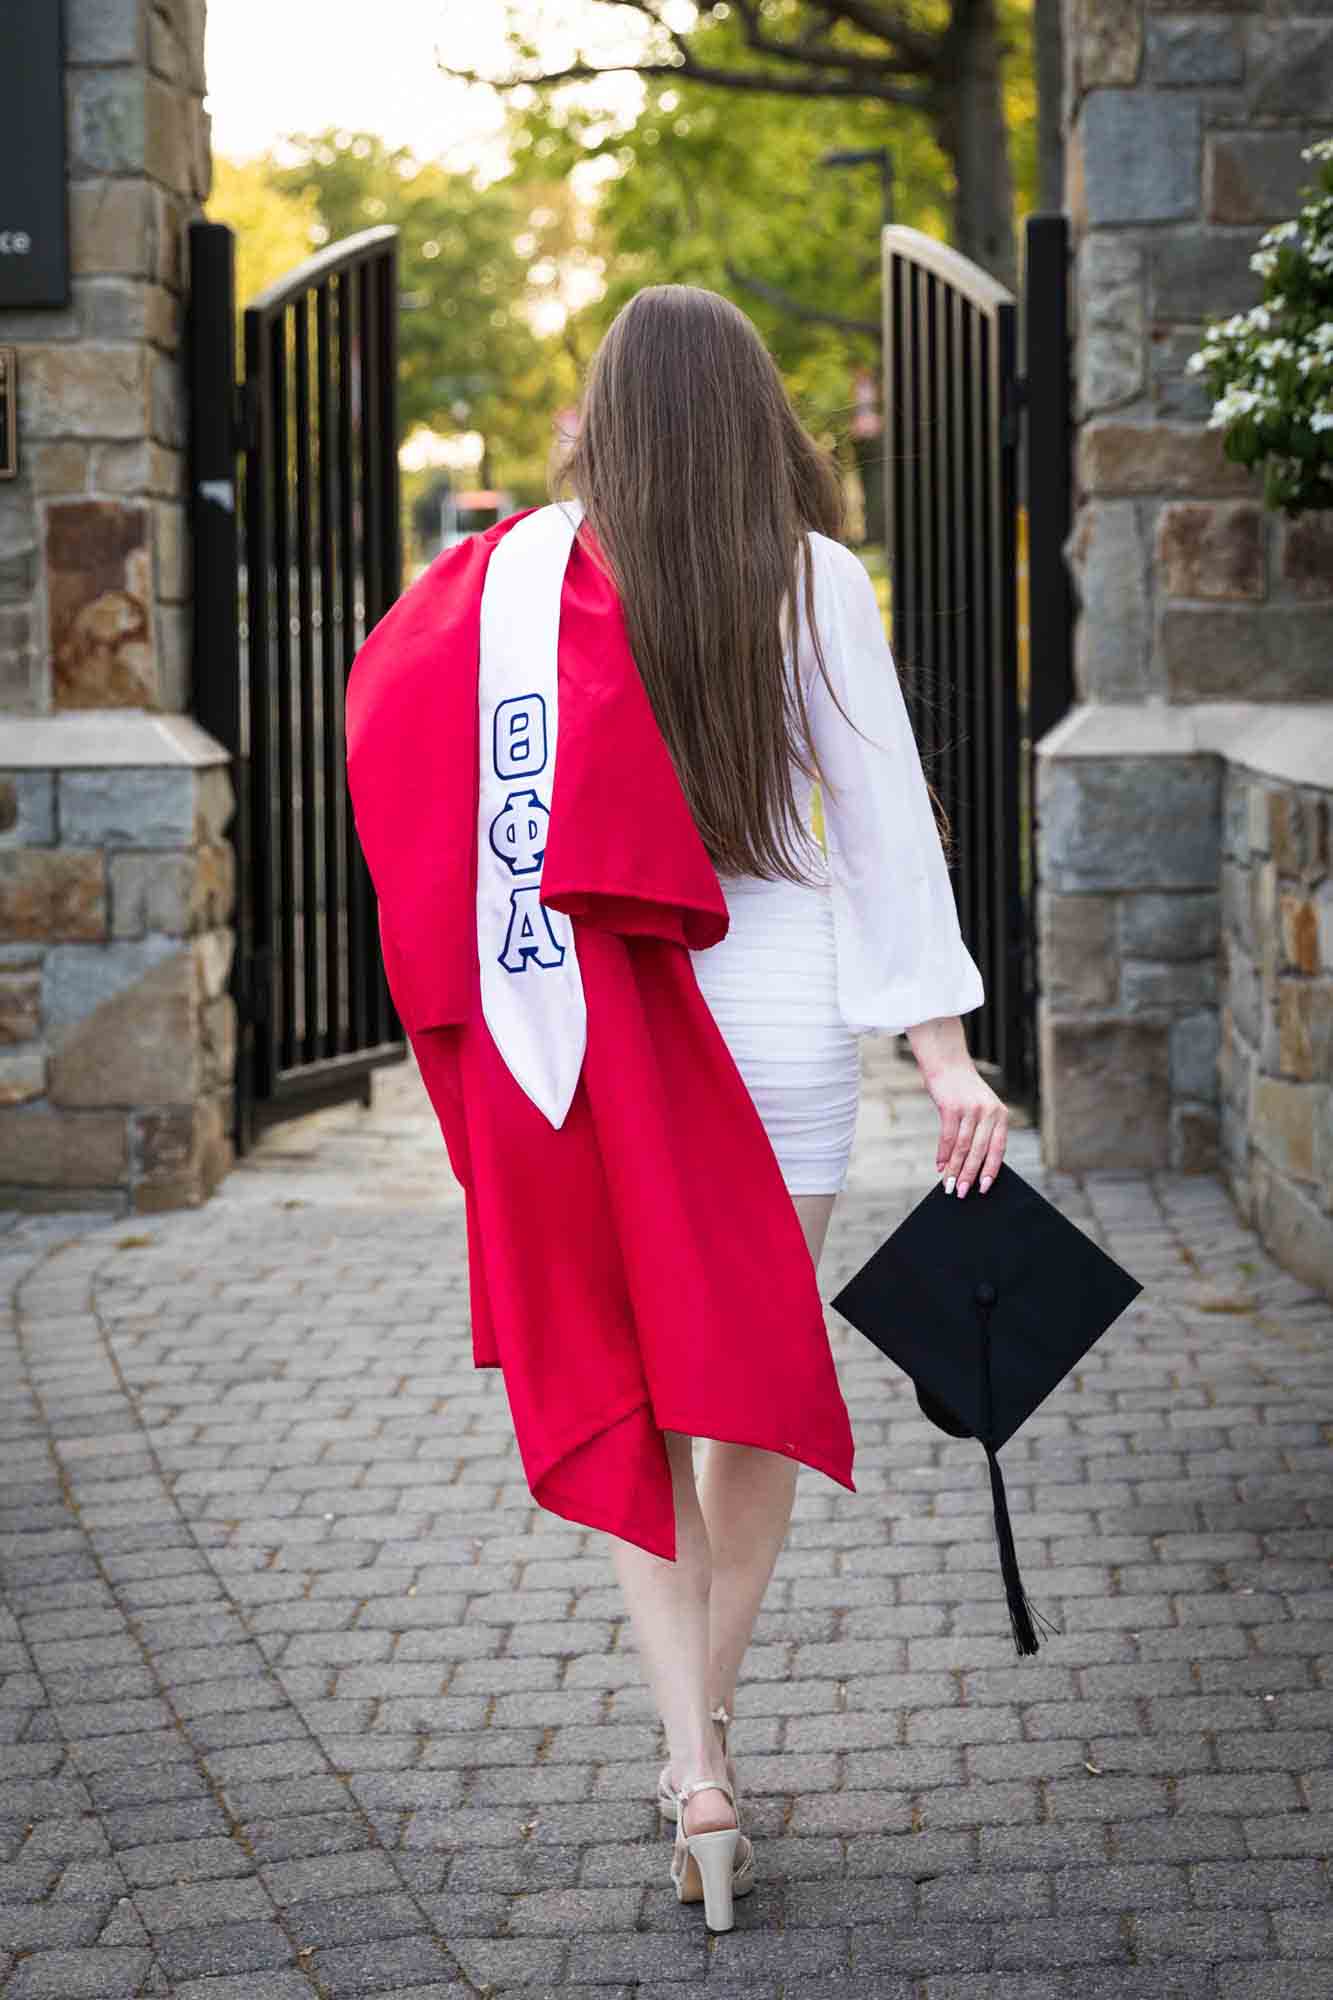 Female graduate holding red robe over shoulder and cap in hand during a St. John’s University graduate portrait session